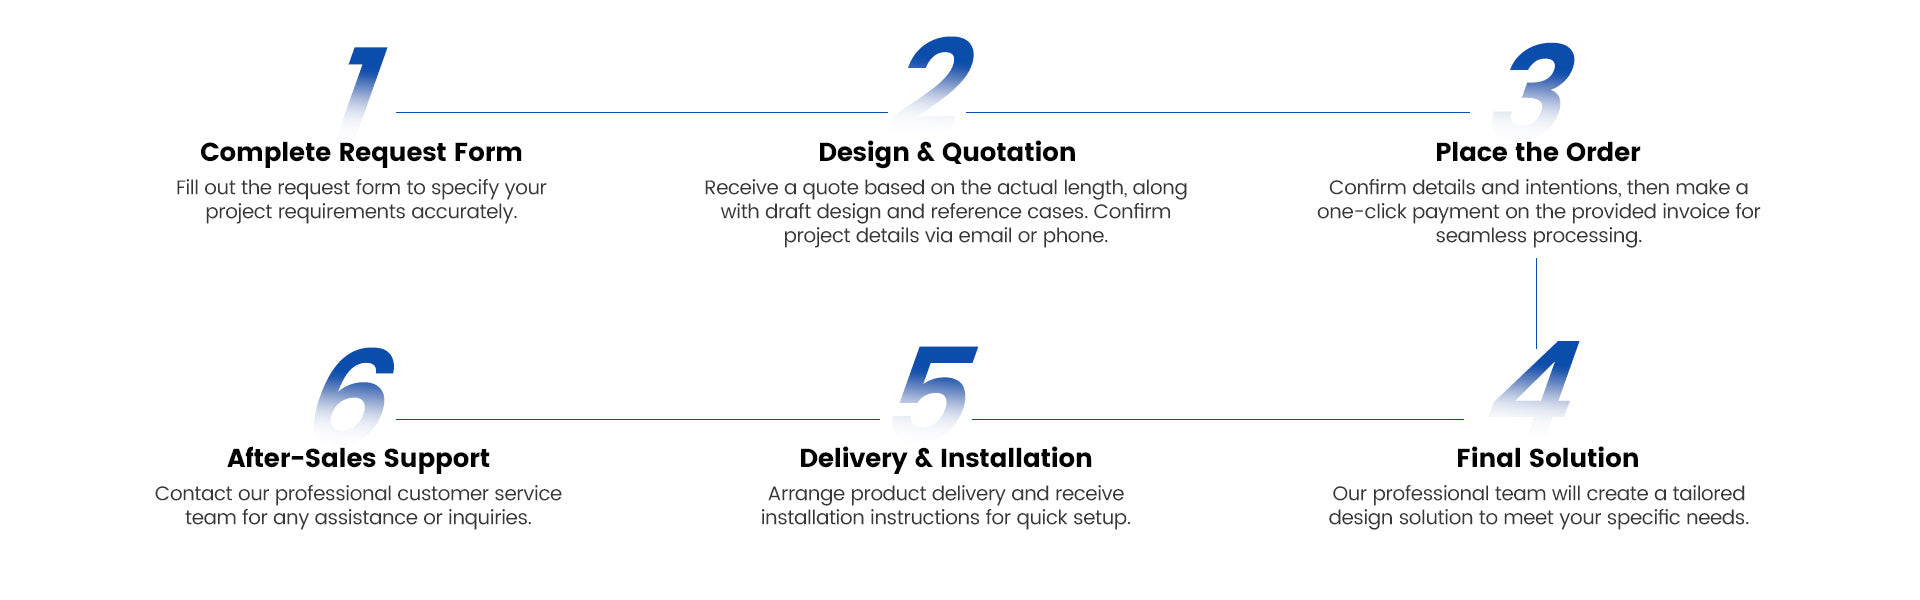 Project design ordering process